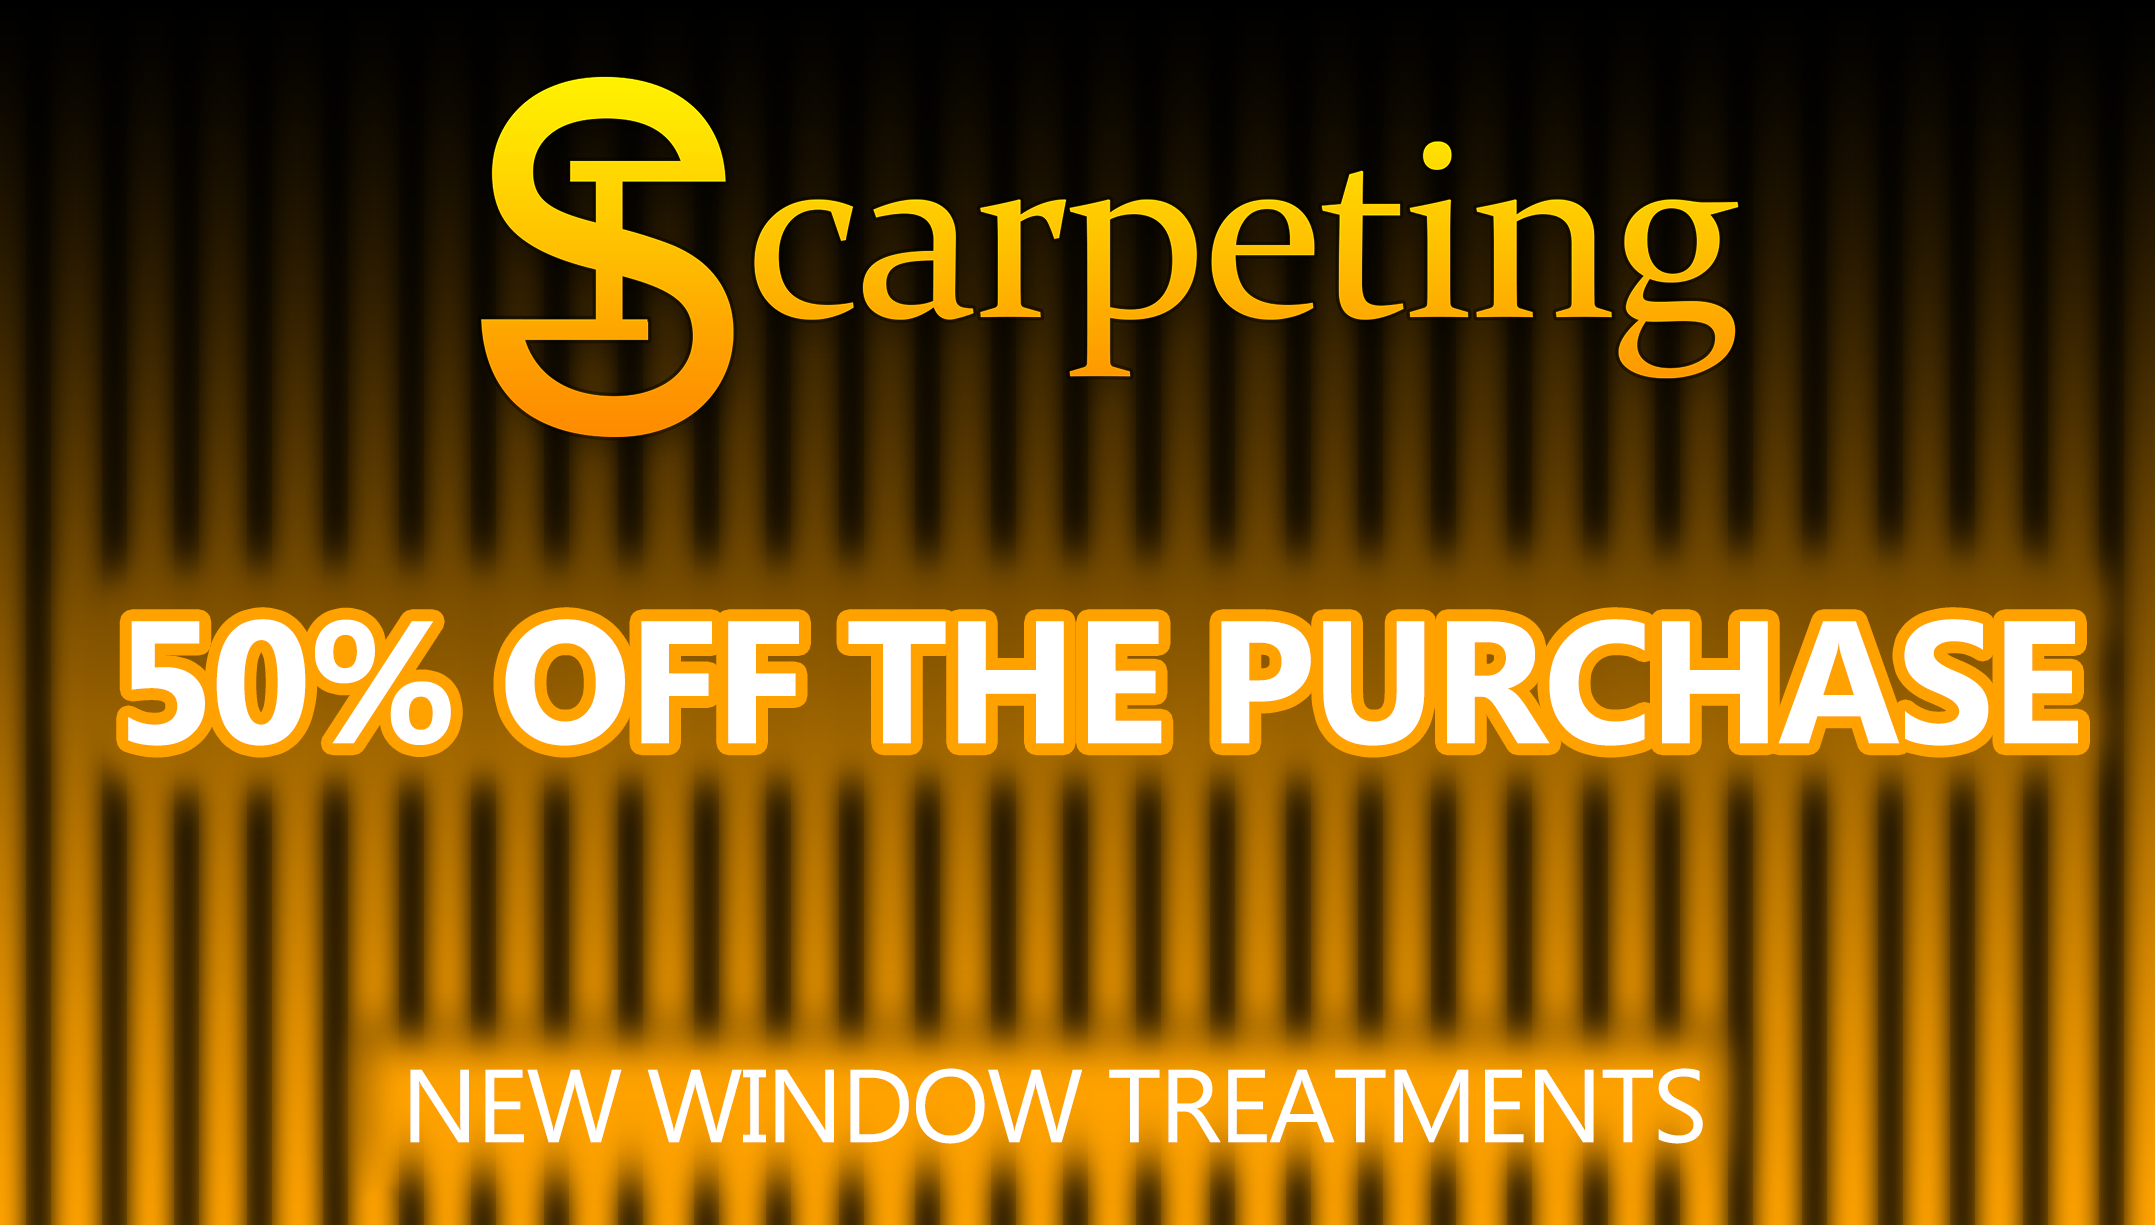 50 PERCENT OFF THE PURCHASE OF ANY NEW WINDOW TREATMENTS